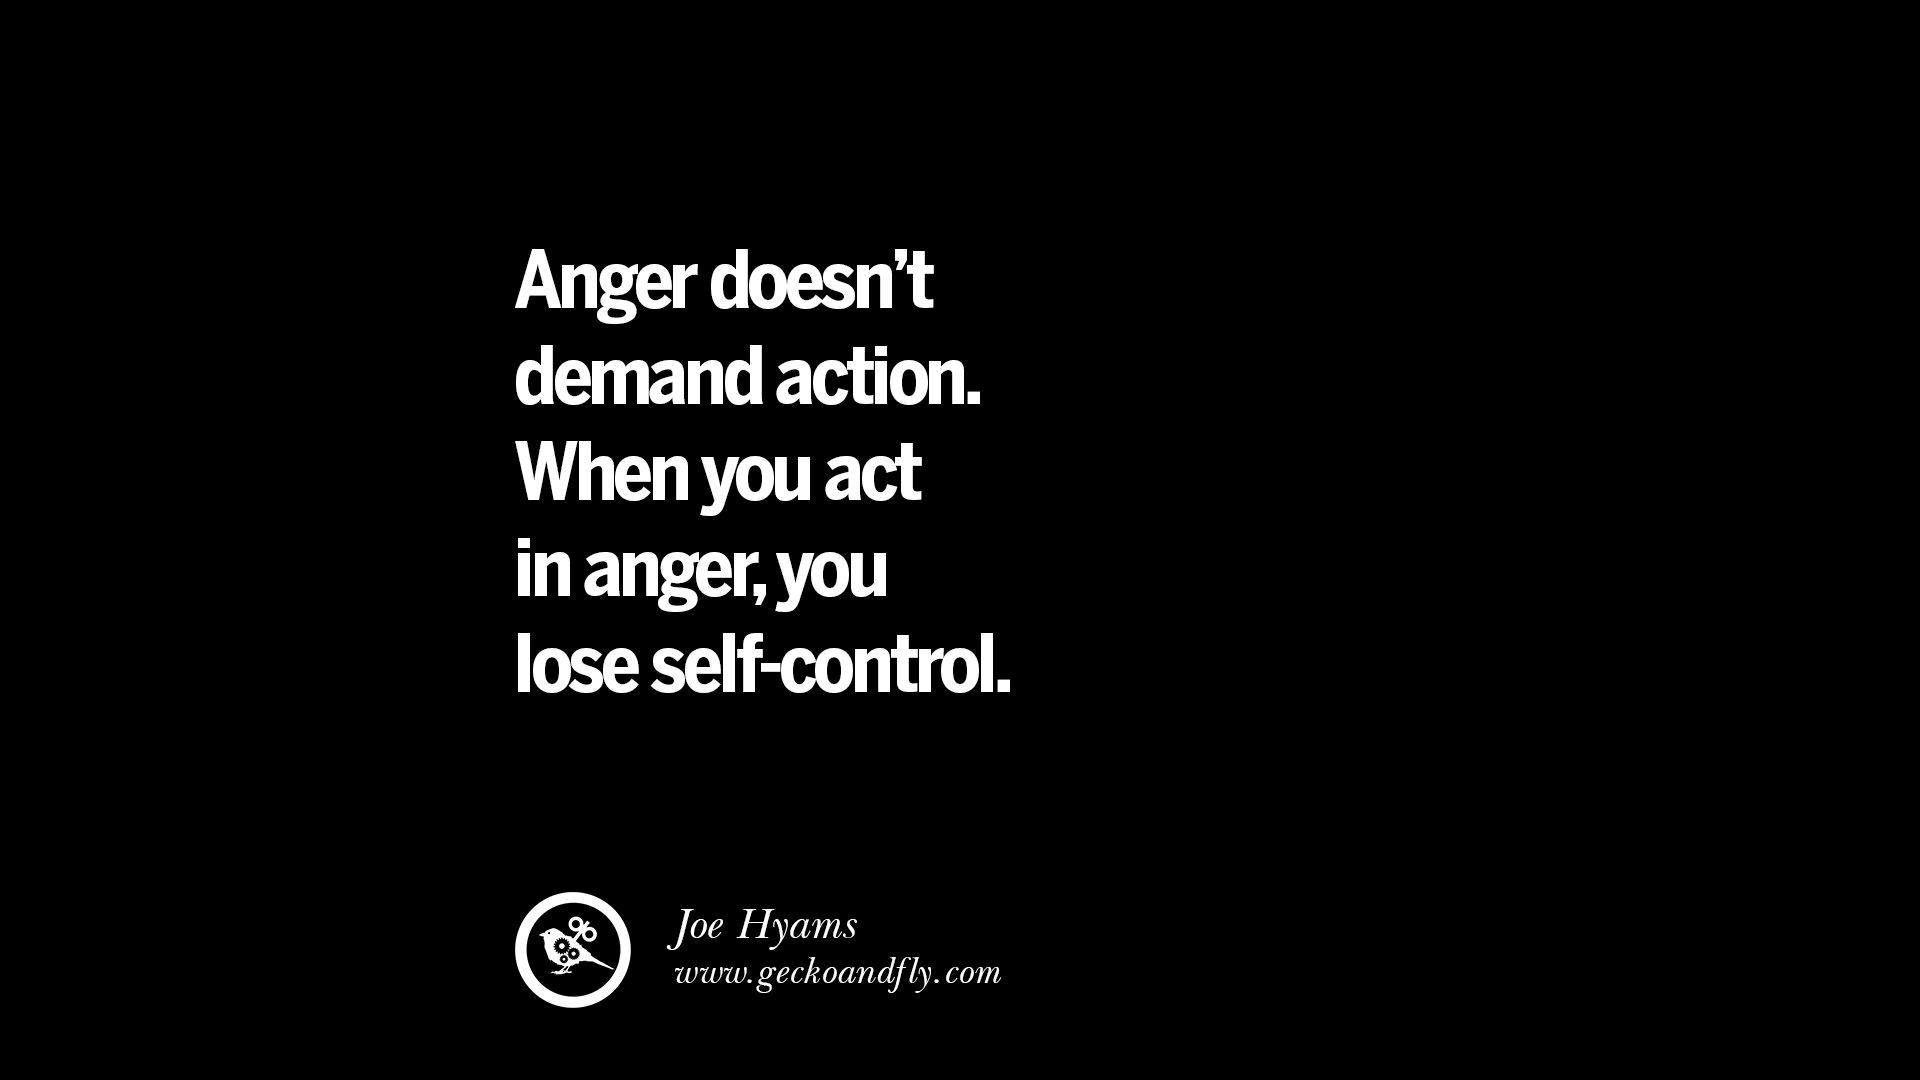 Quotes On Anger Management, Controlling Anger, And Relieving Stress